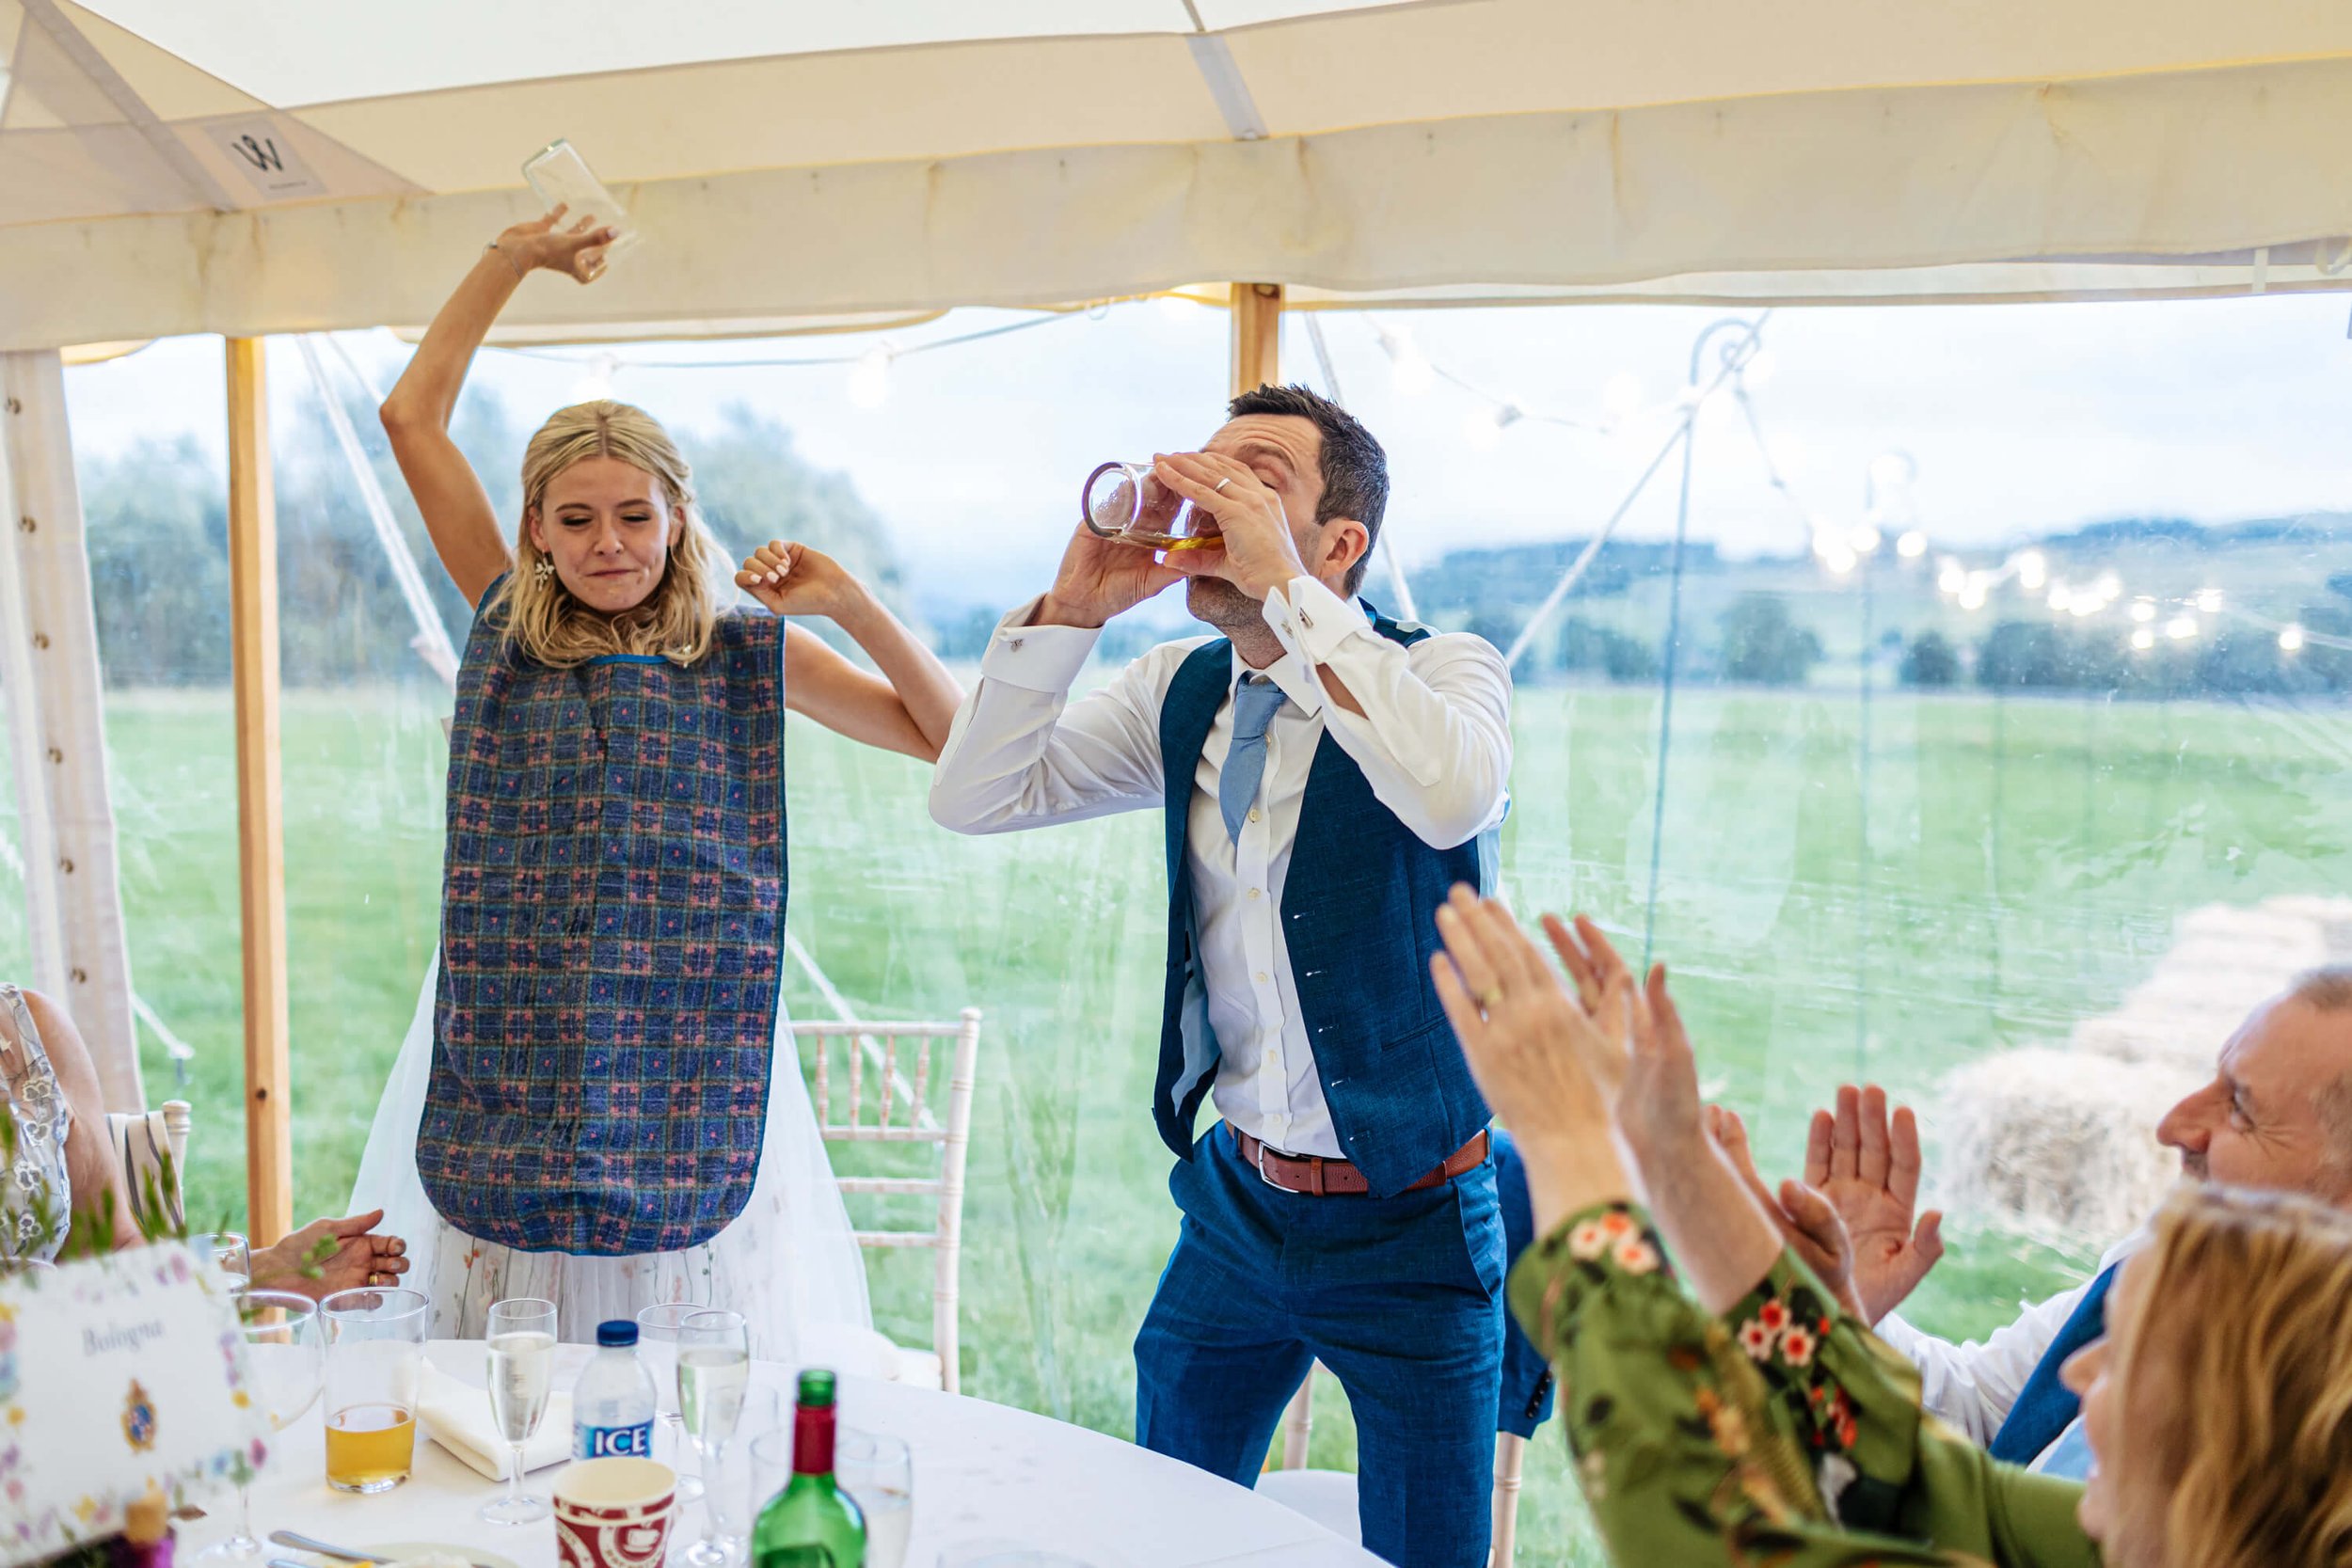 Bride wins the drinking race at her wedding